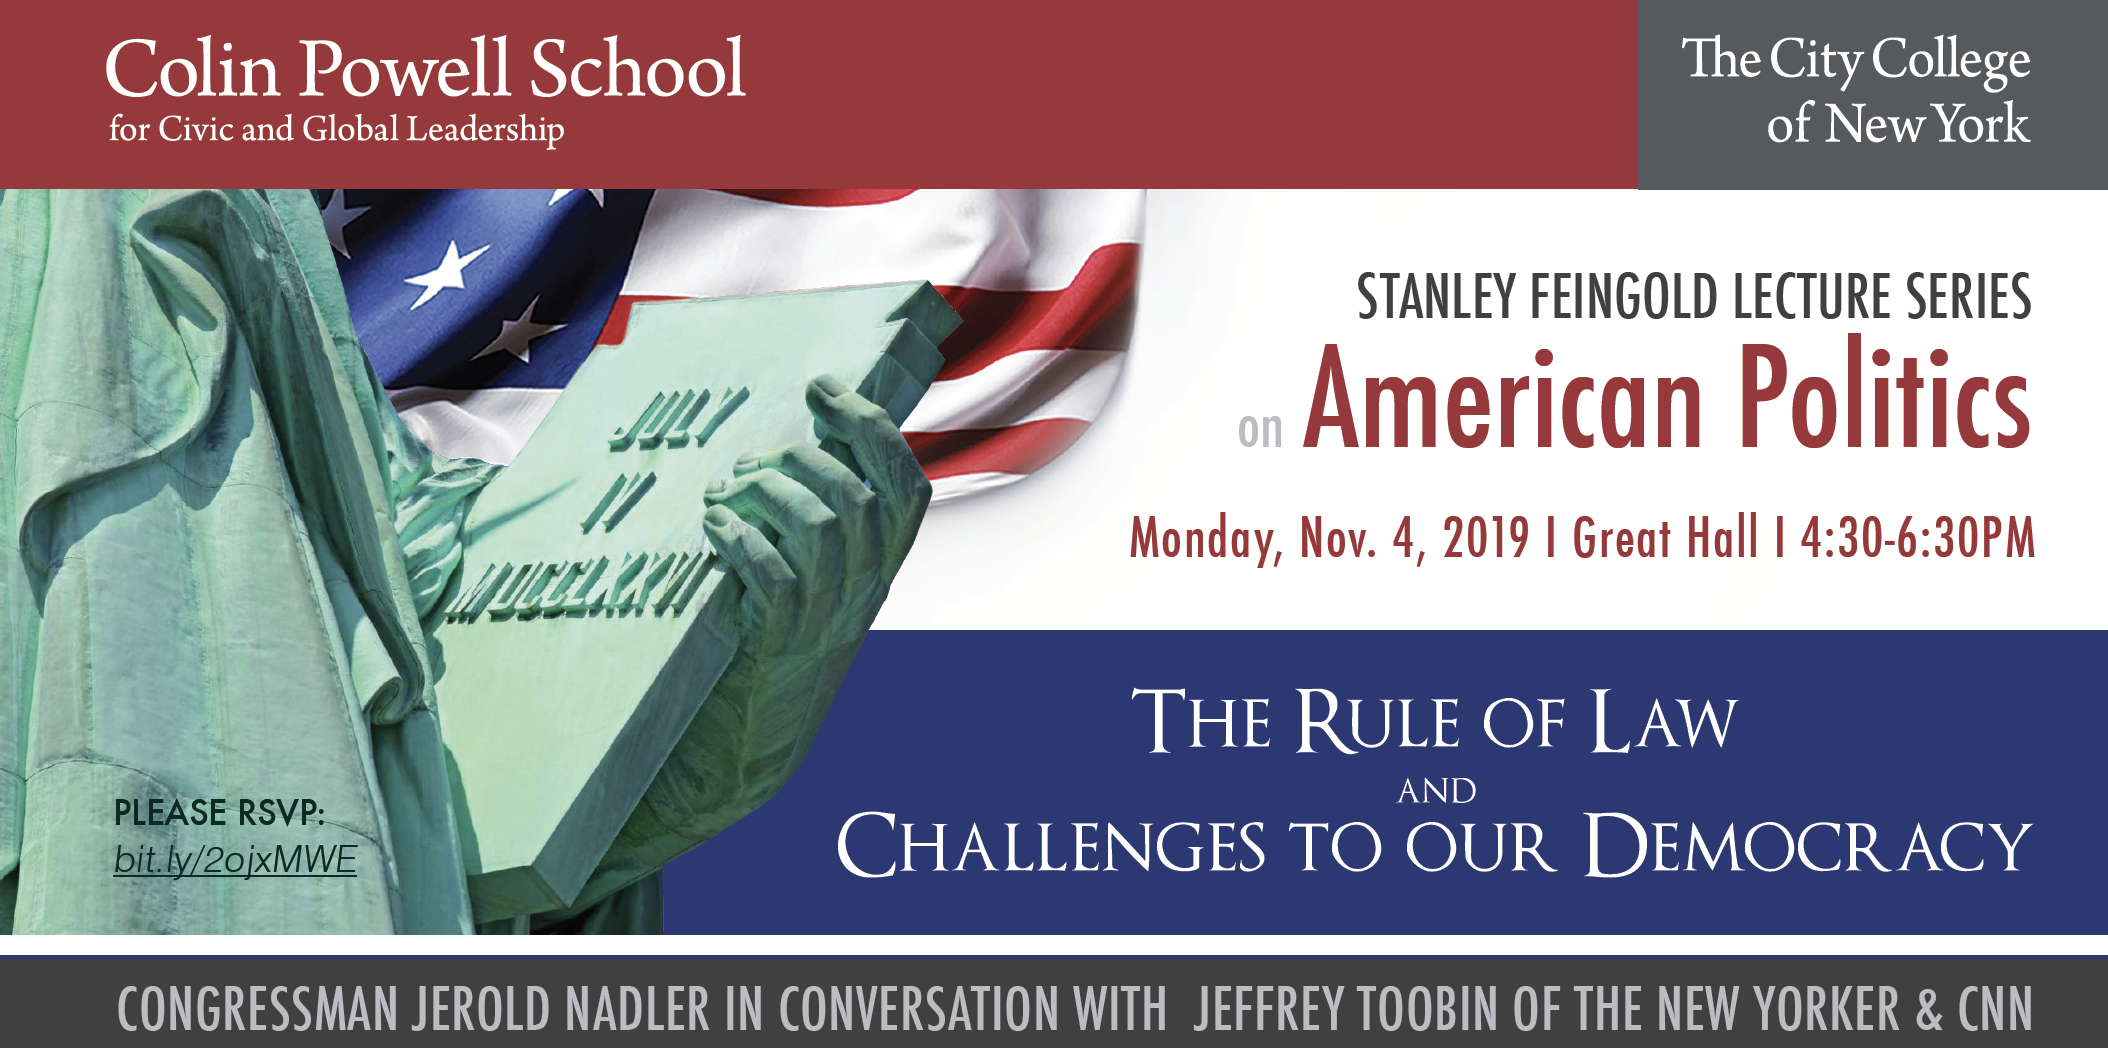 2nd ANNUAL STANLEY FEINGOLD LECTURE SERIES ON AMERICAN POLITICS